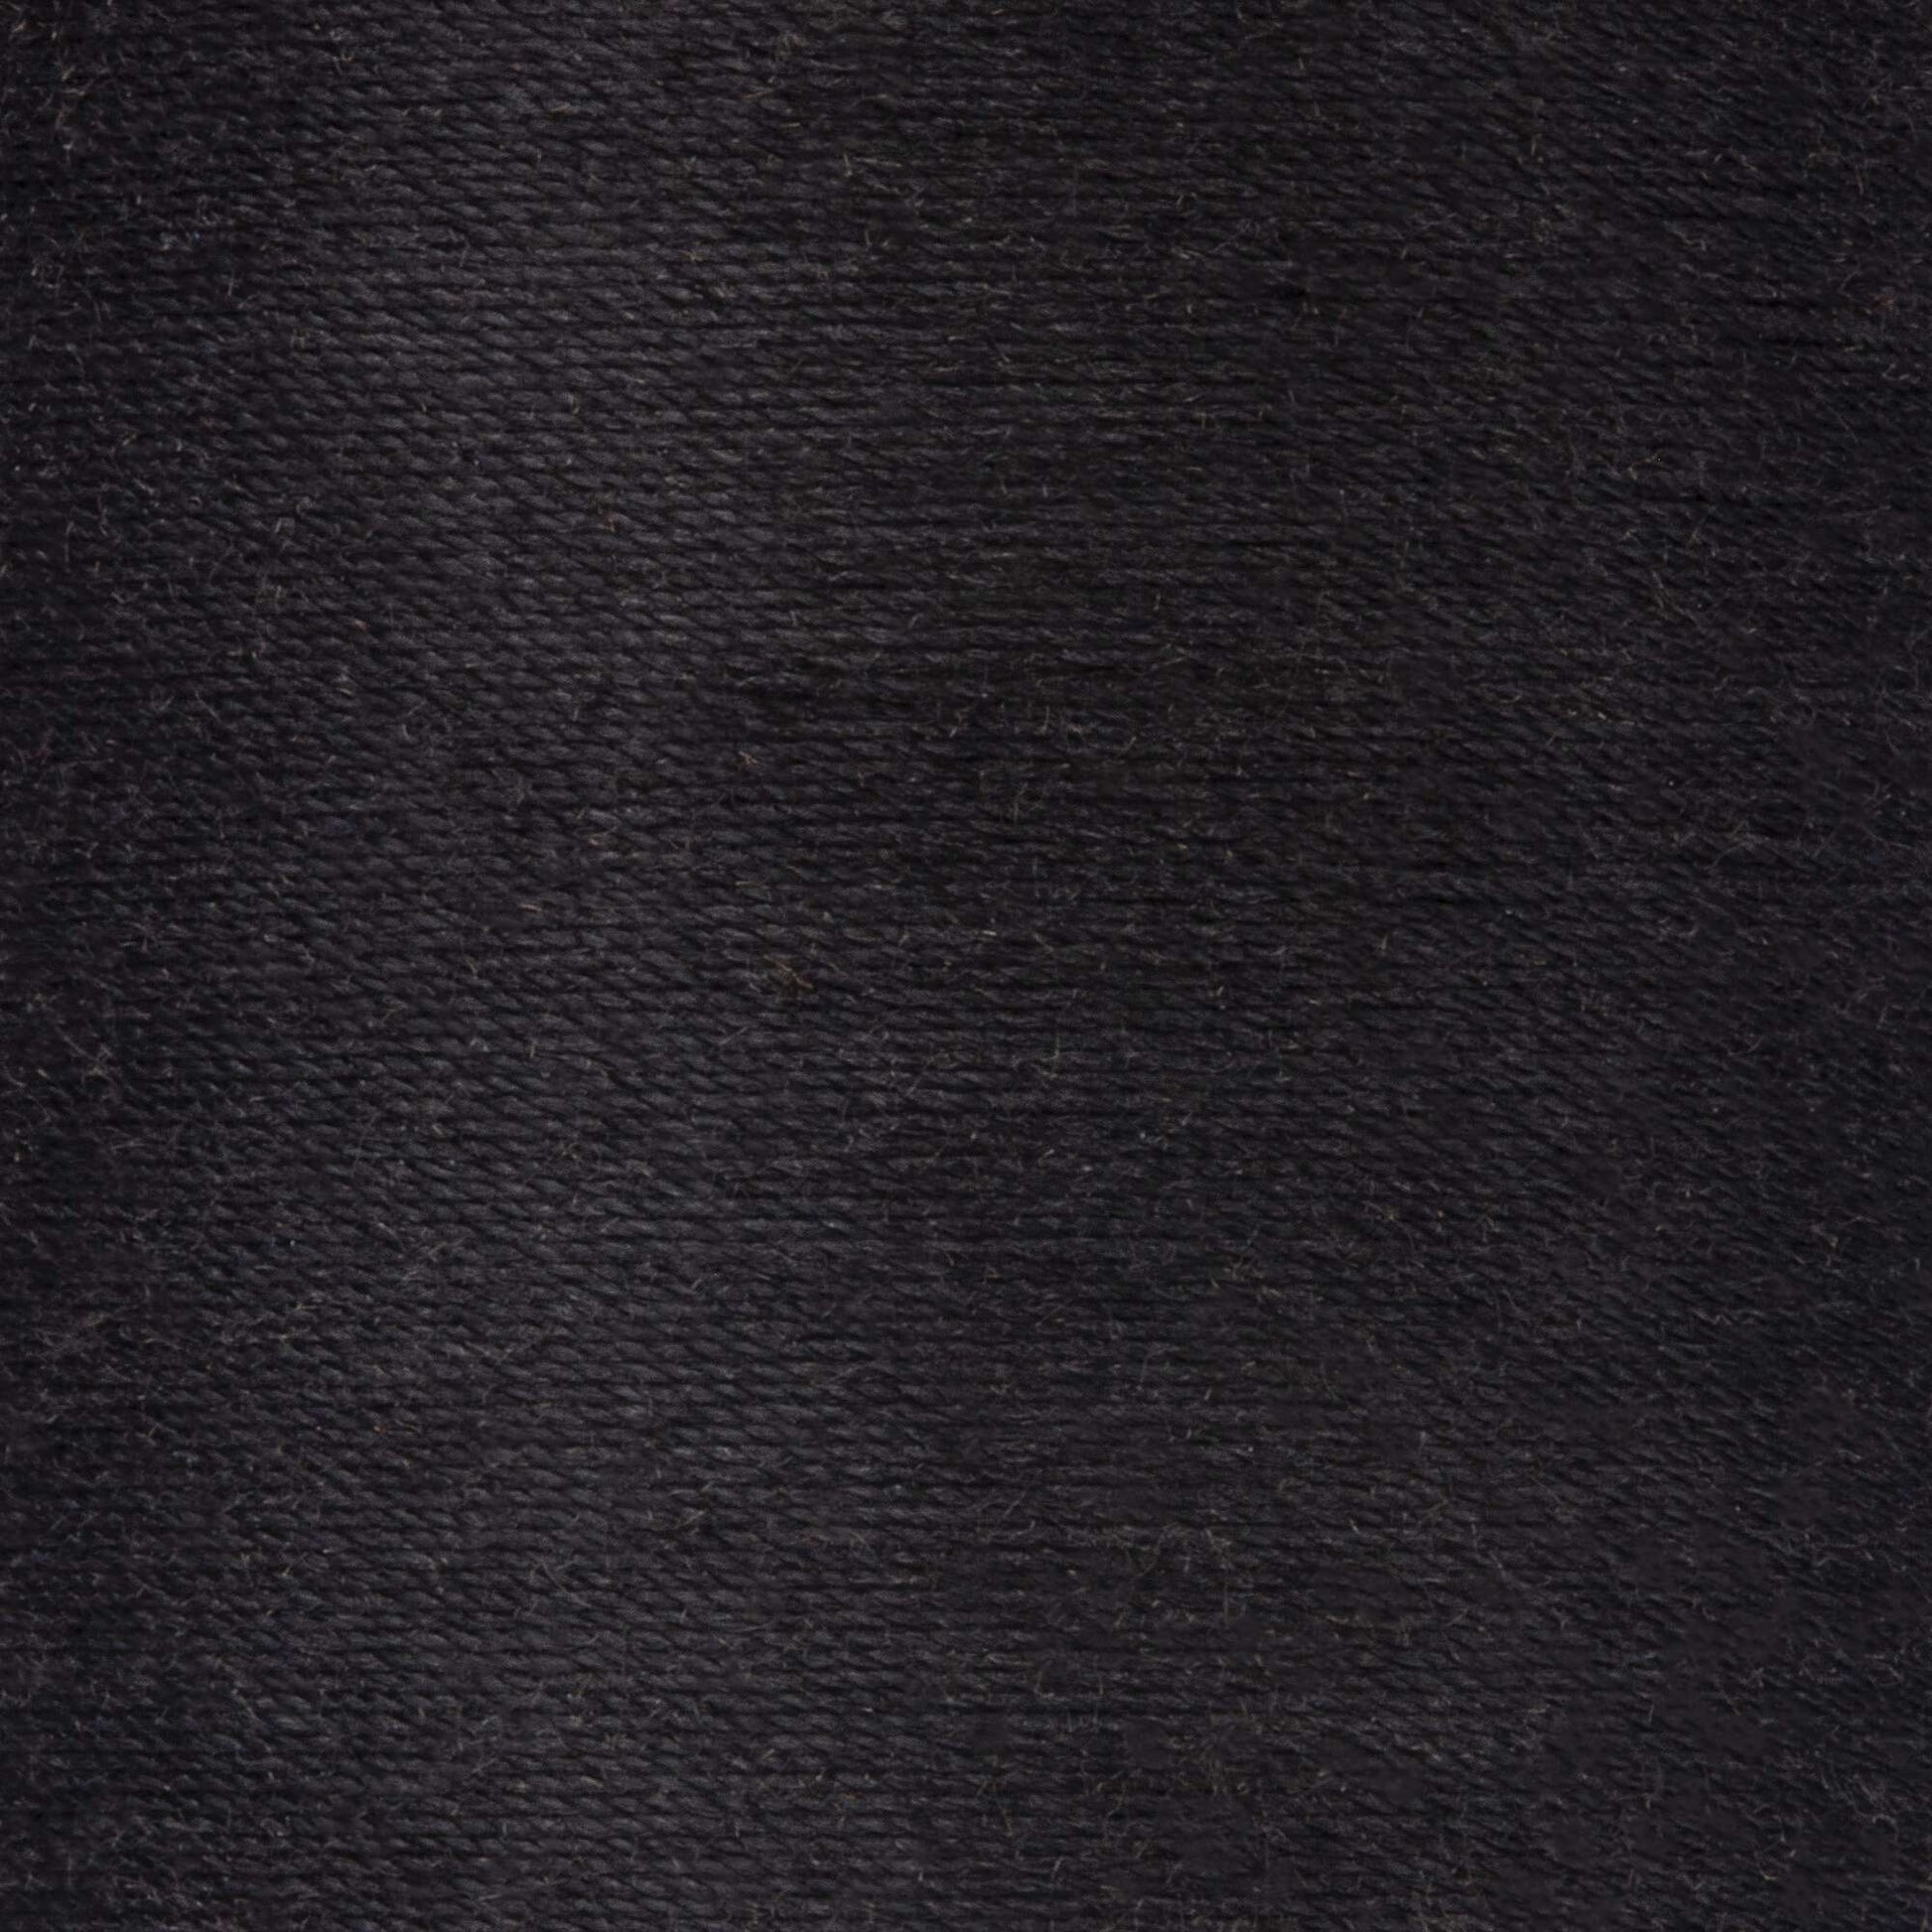 Coats & Clark Cotton Covered Quilting & Piecing Thread (500 Yards) Black